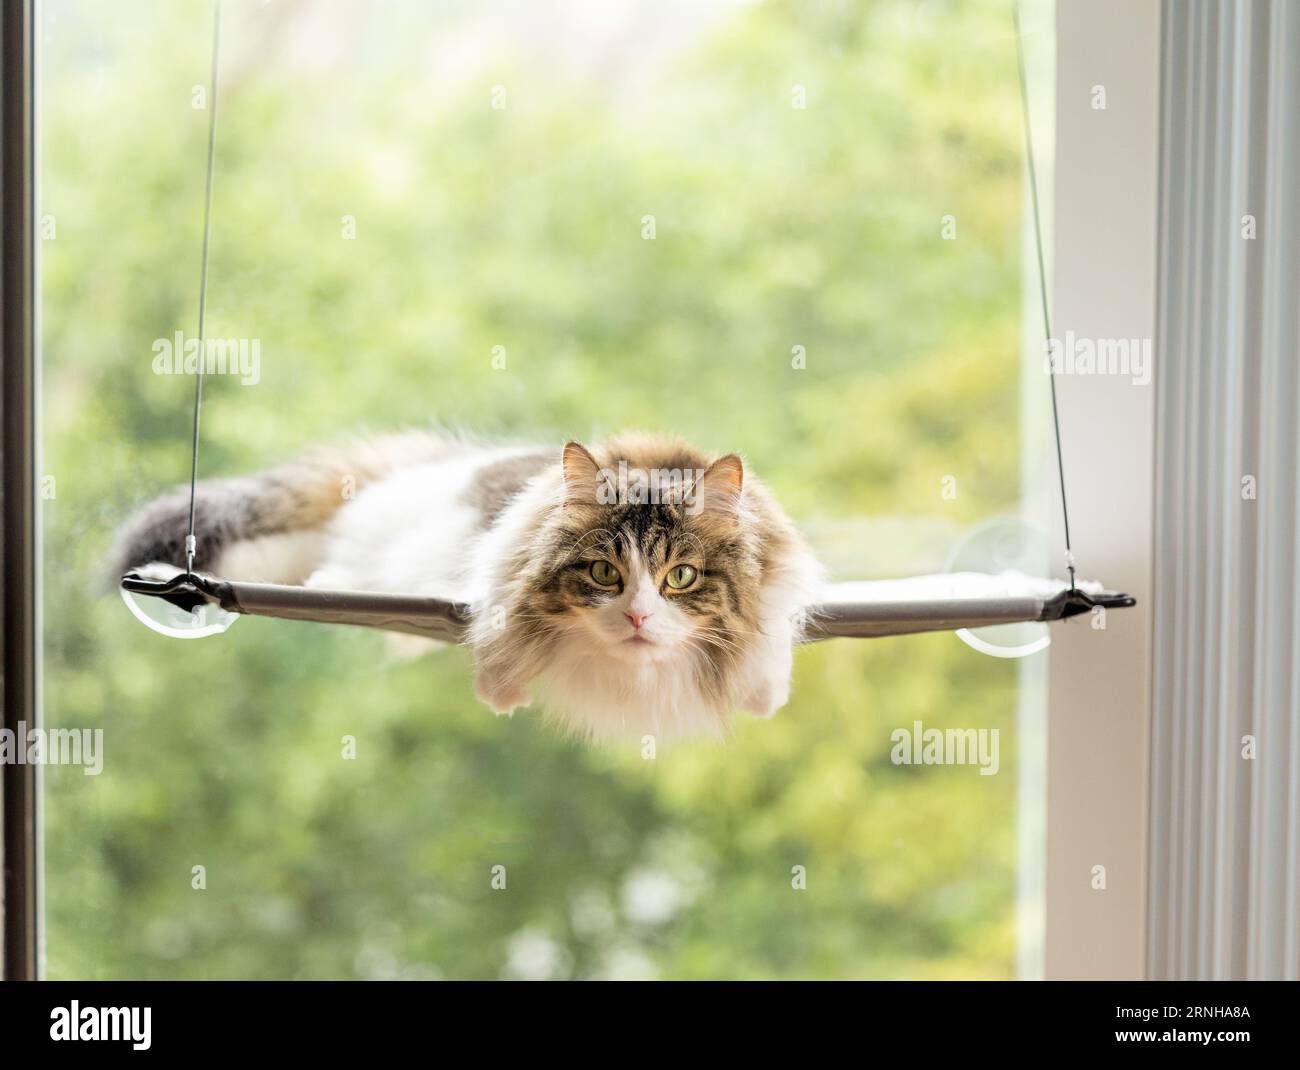 A longhaired cat draped on a window perch Stock Photo